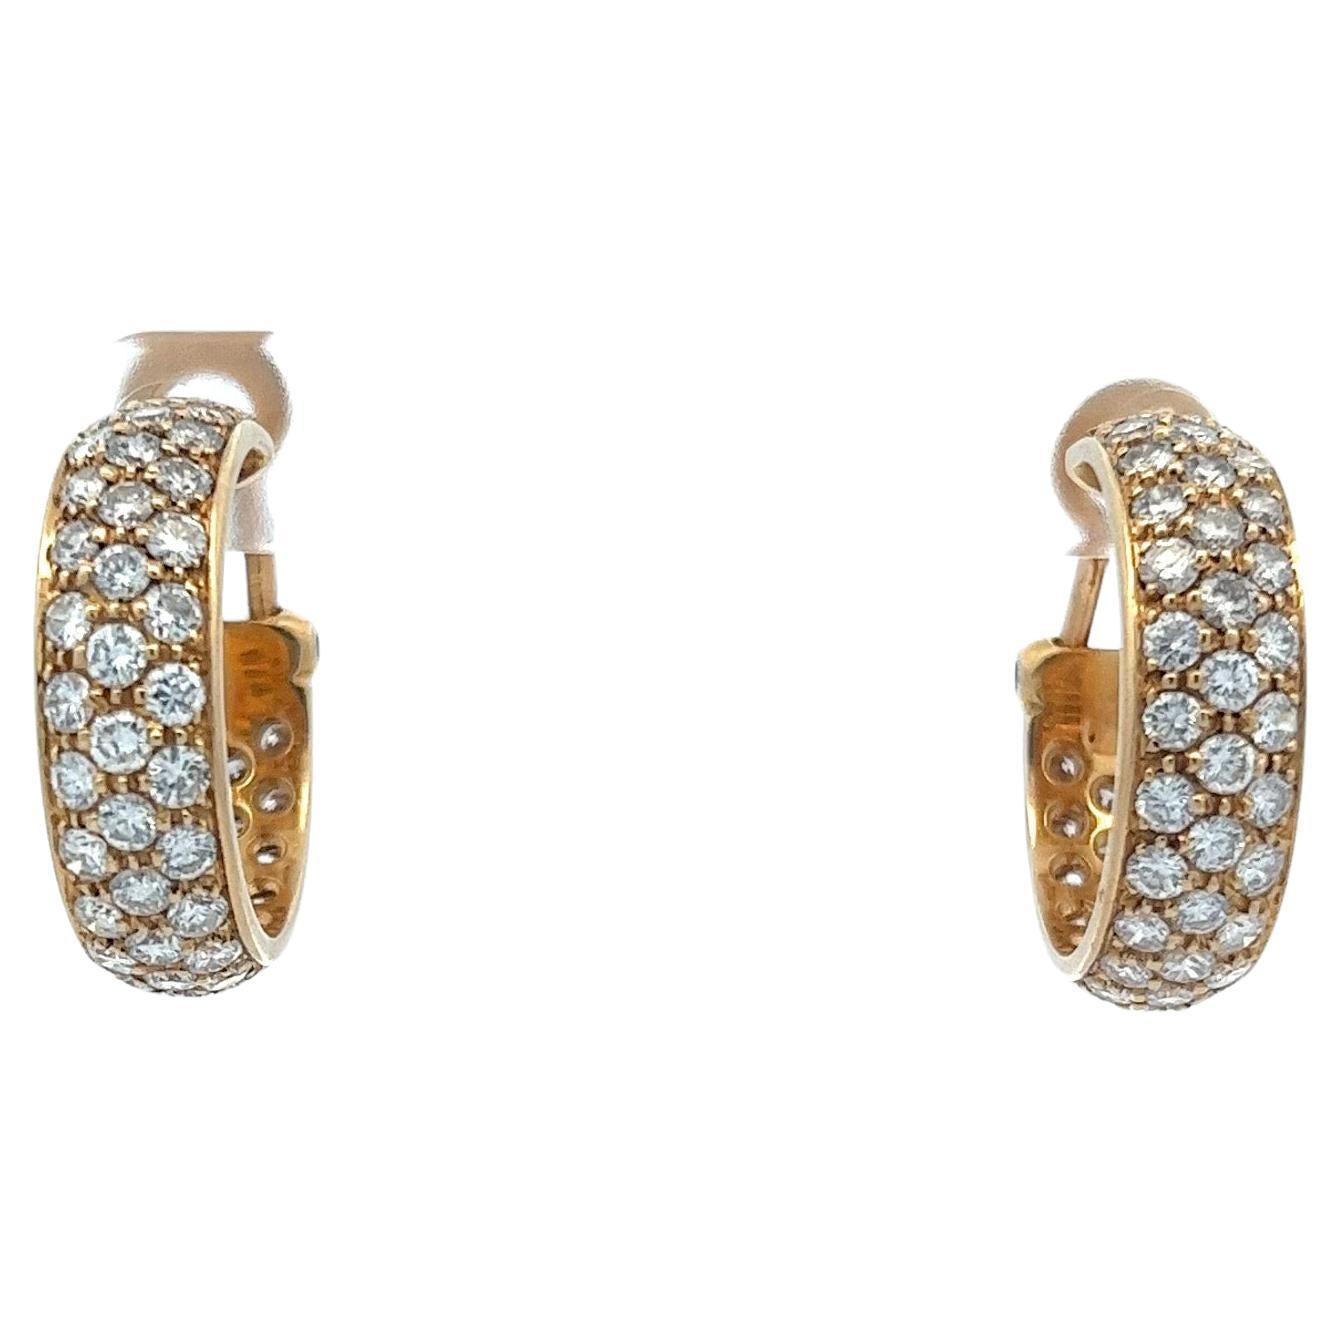 Introducing our exquisite 18 karat yellow gold hoop huggie earrings, meticulously adorned with a stunning array of diamonds. This pair of earrings epitomizes elegance and luxury, featuring a delicate pave setting that showcases the brilliance of 108